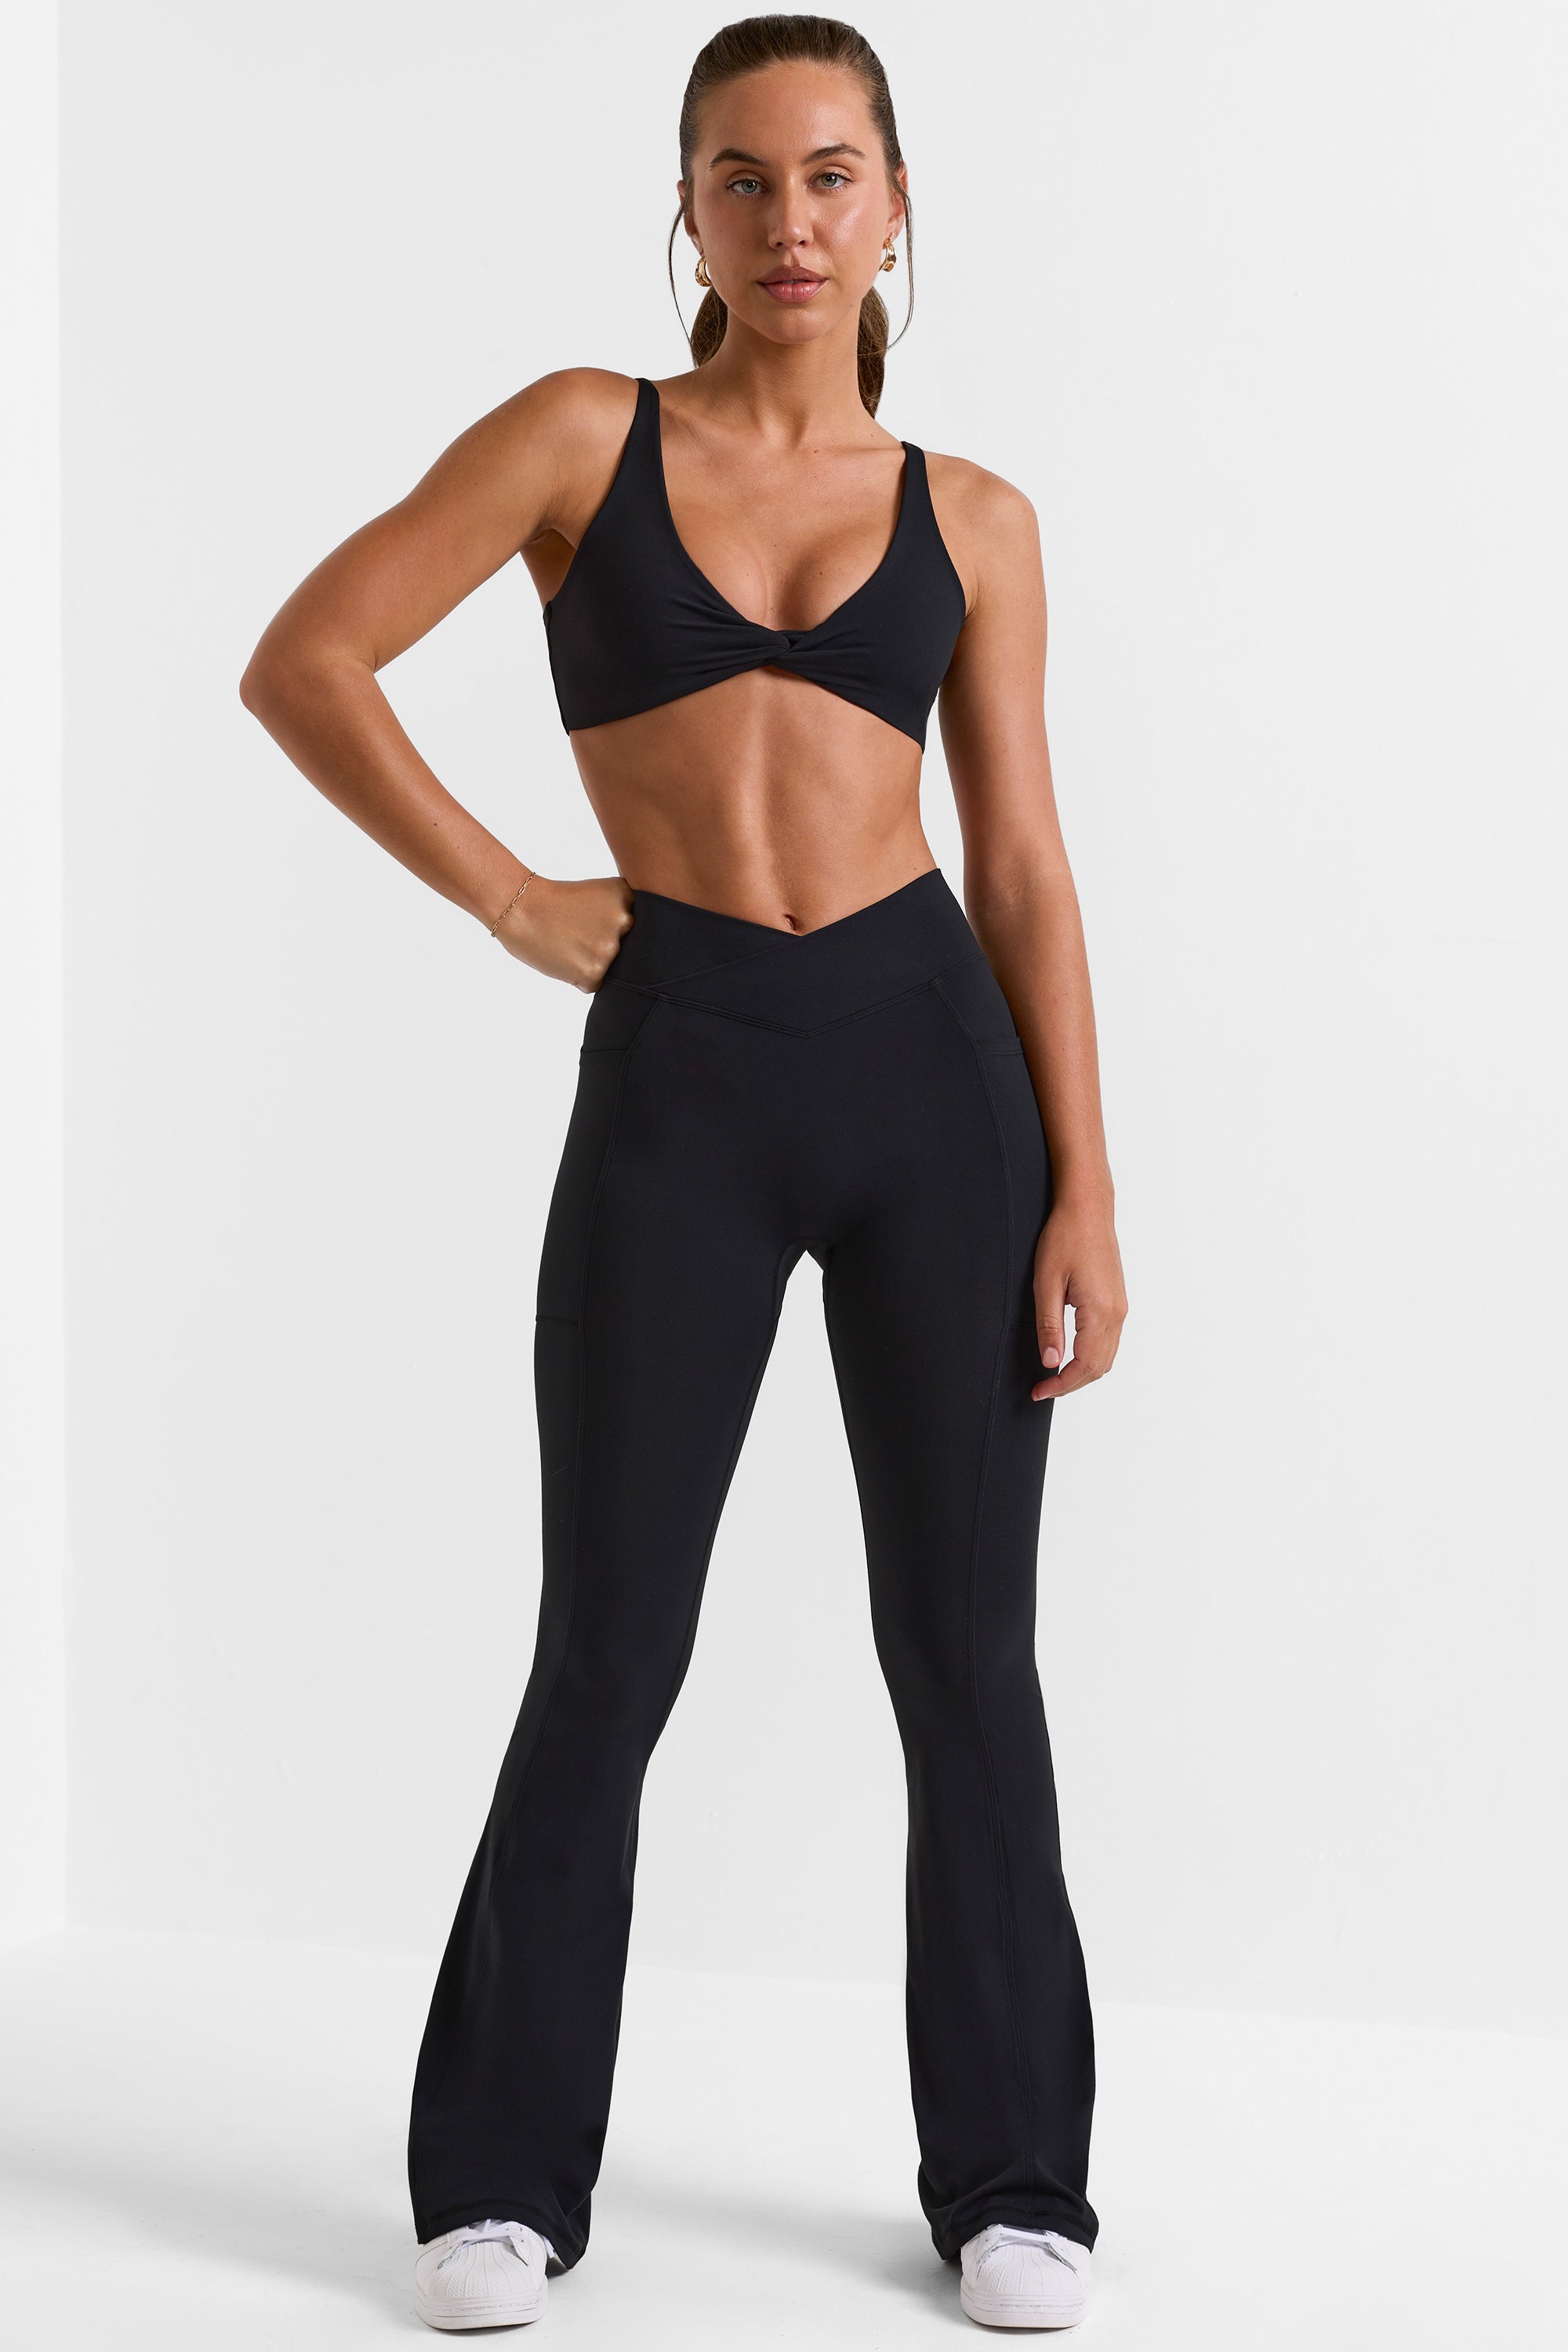 Womens Crossover Flare Leggings, High Waisted Yoga Sports Pants